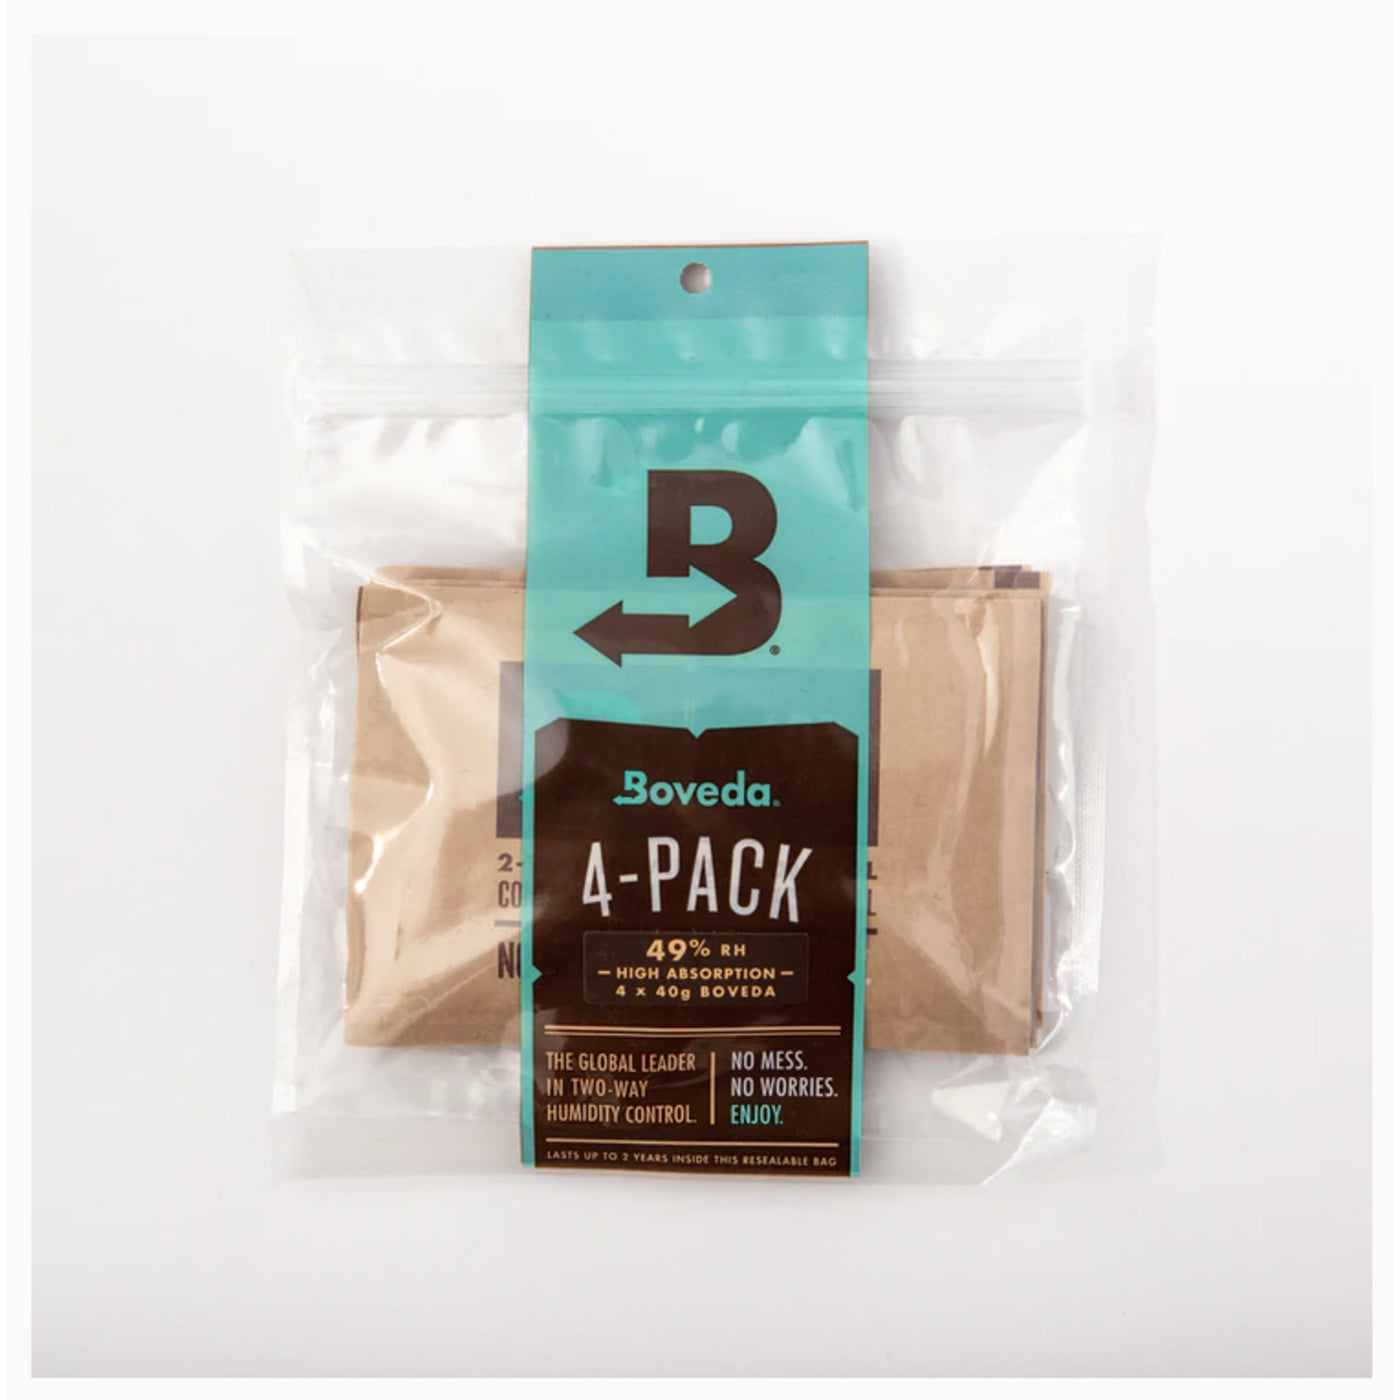 Boveda 2-Way Humidity Control Pack, High Absorption, 49% RH, 40g 4-Pack Refill (B49HA-40-4P)